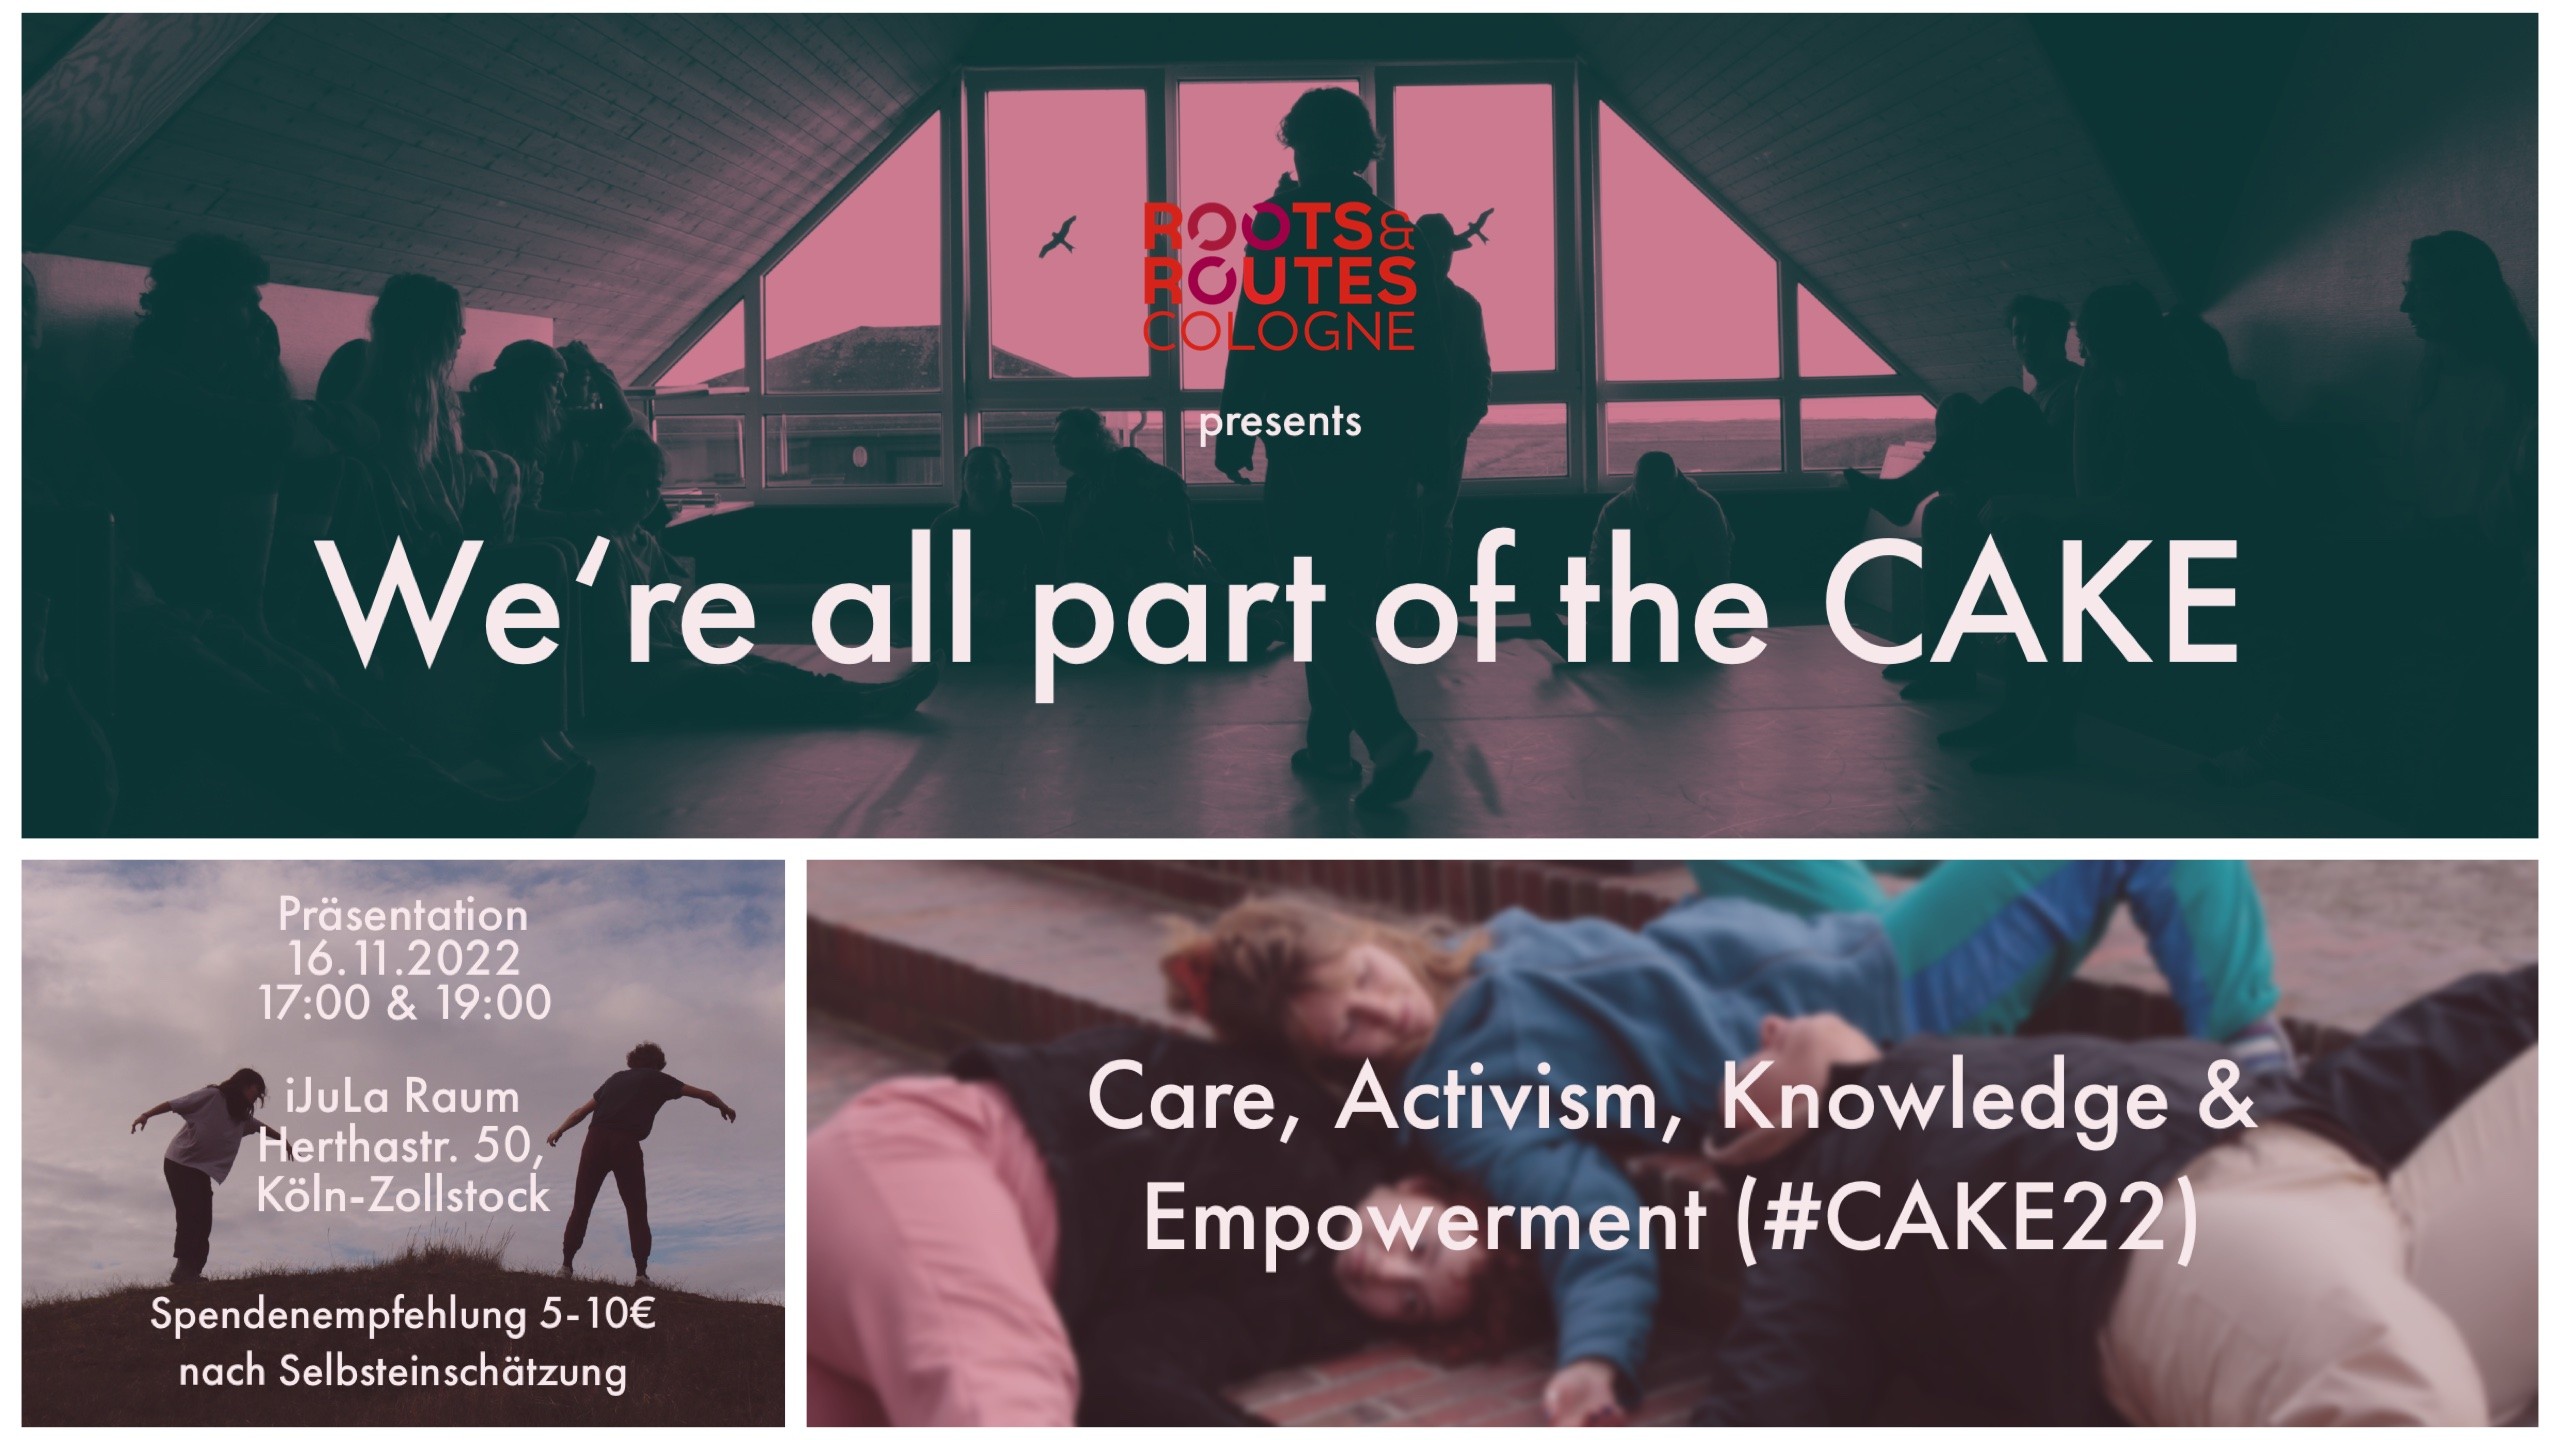 Coverbild: We're all part of the CAKE (Care, Activism, Knowledge & Empowerment)